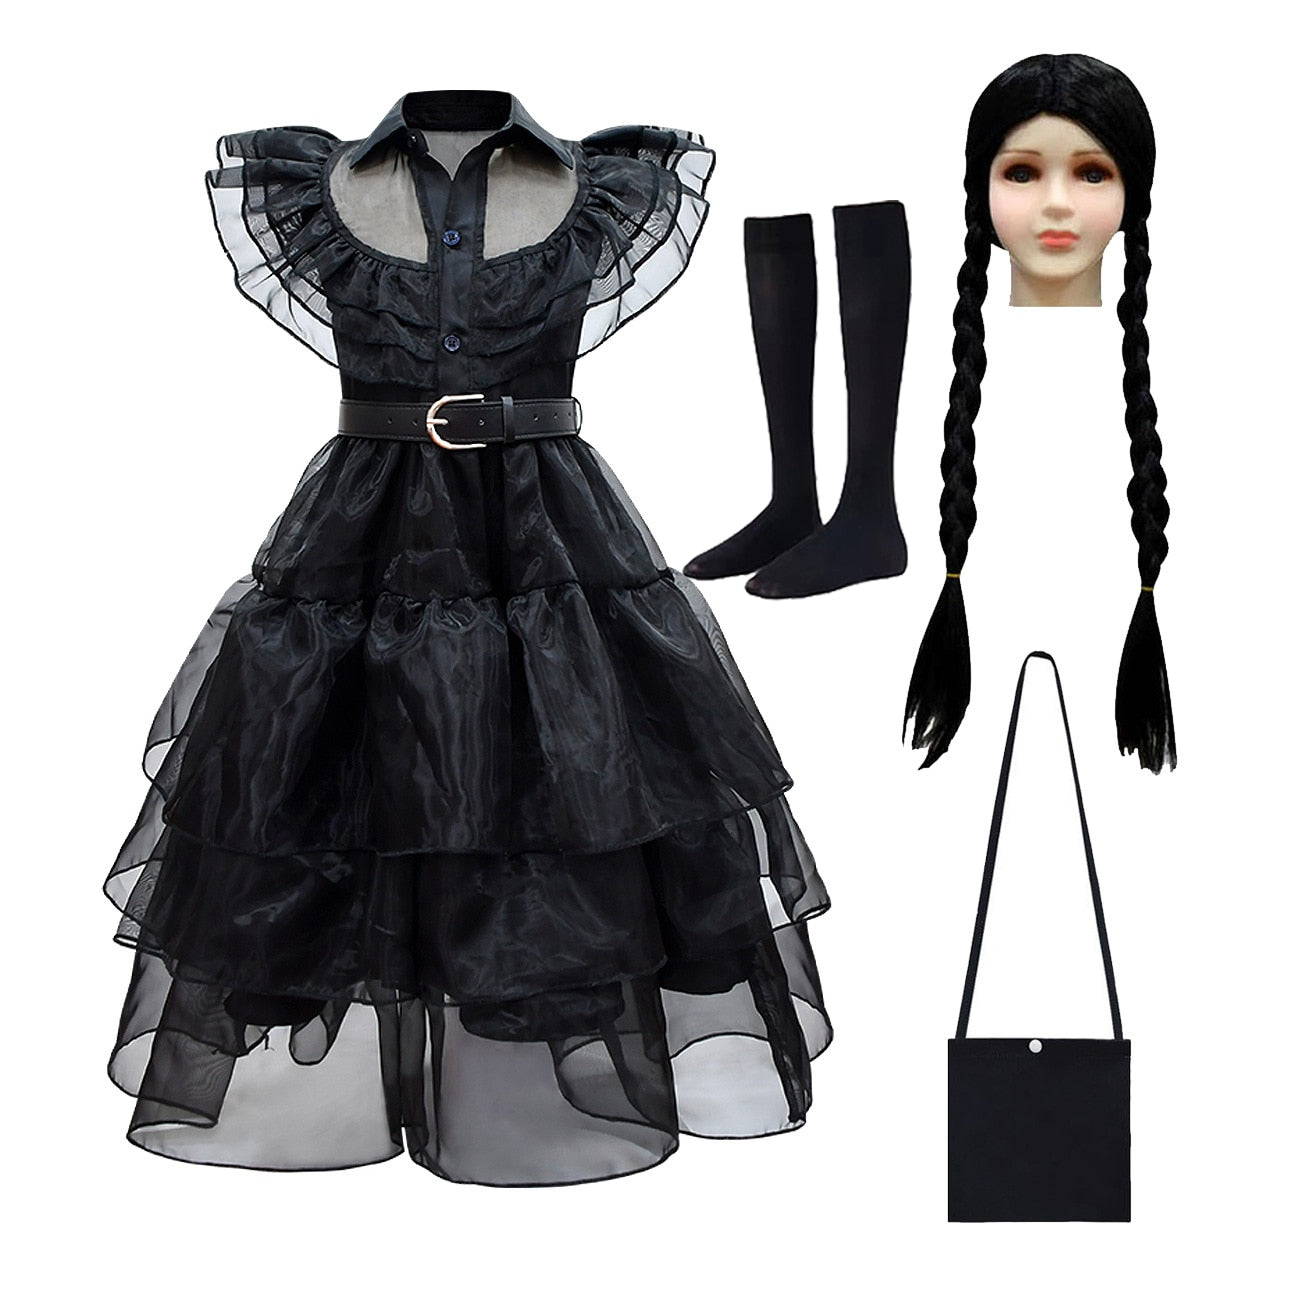 Wednesday Addams Cosplay Dress Kids Girls Costumes Black Gothic Dresses Children Halloween Party Clothes